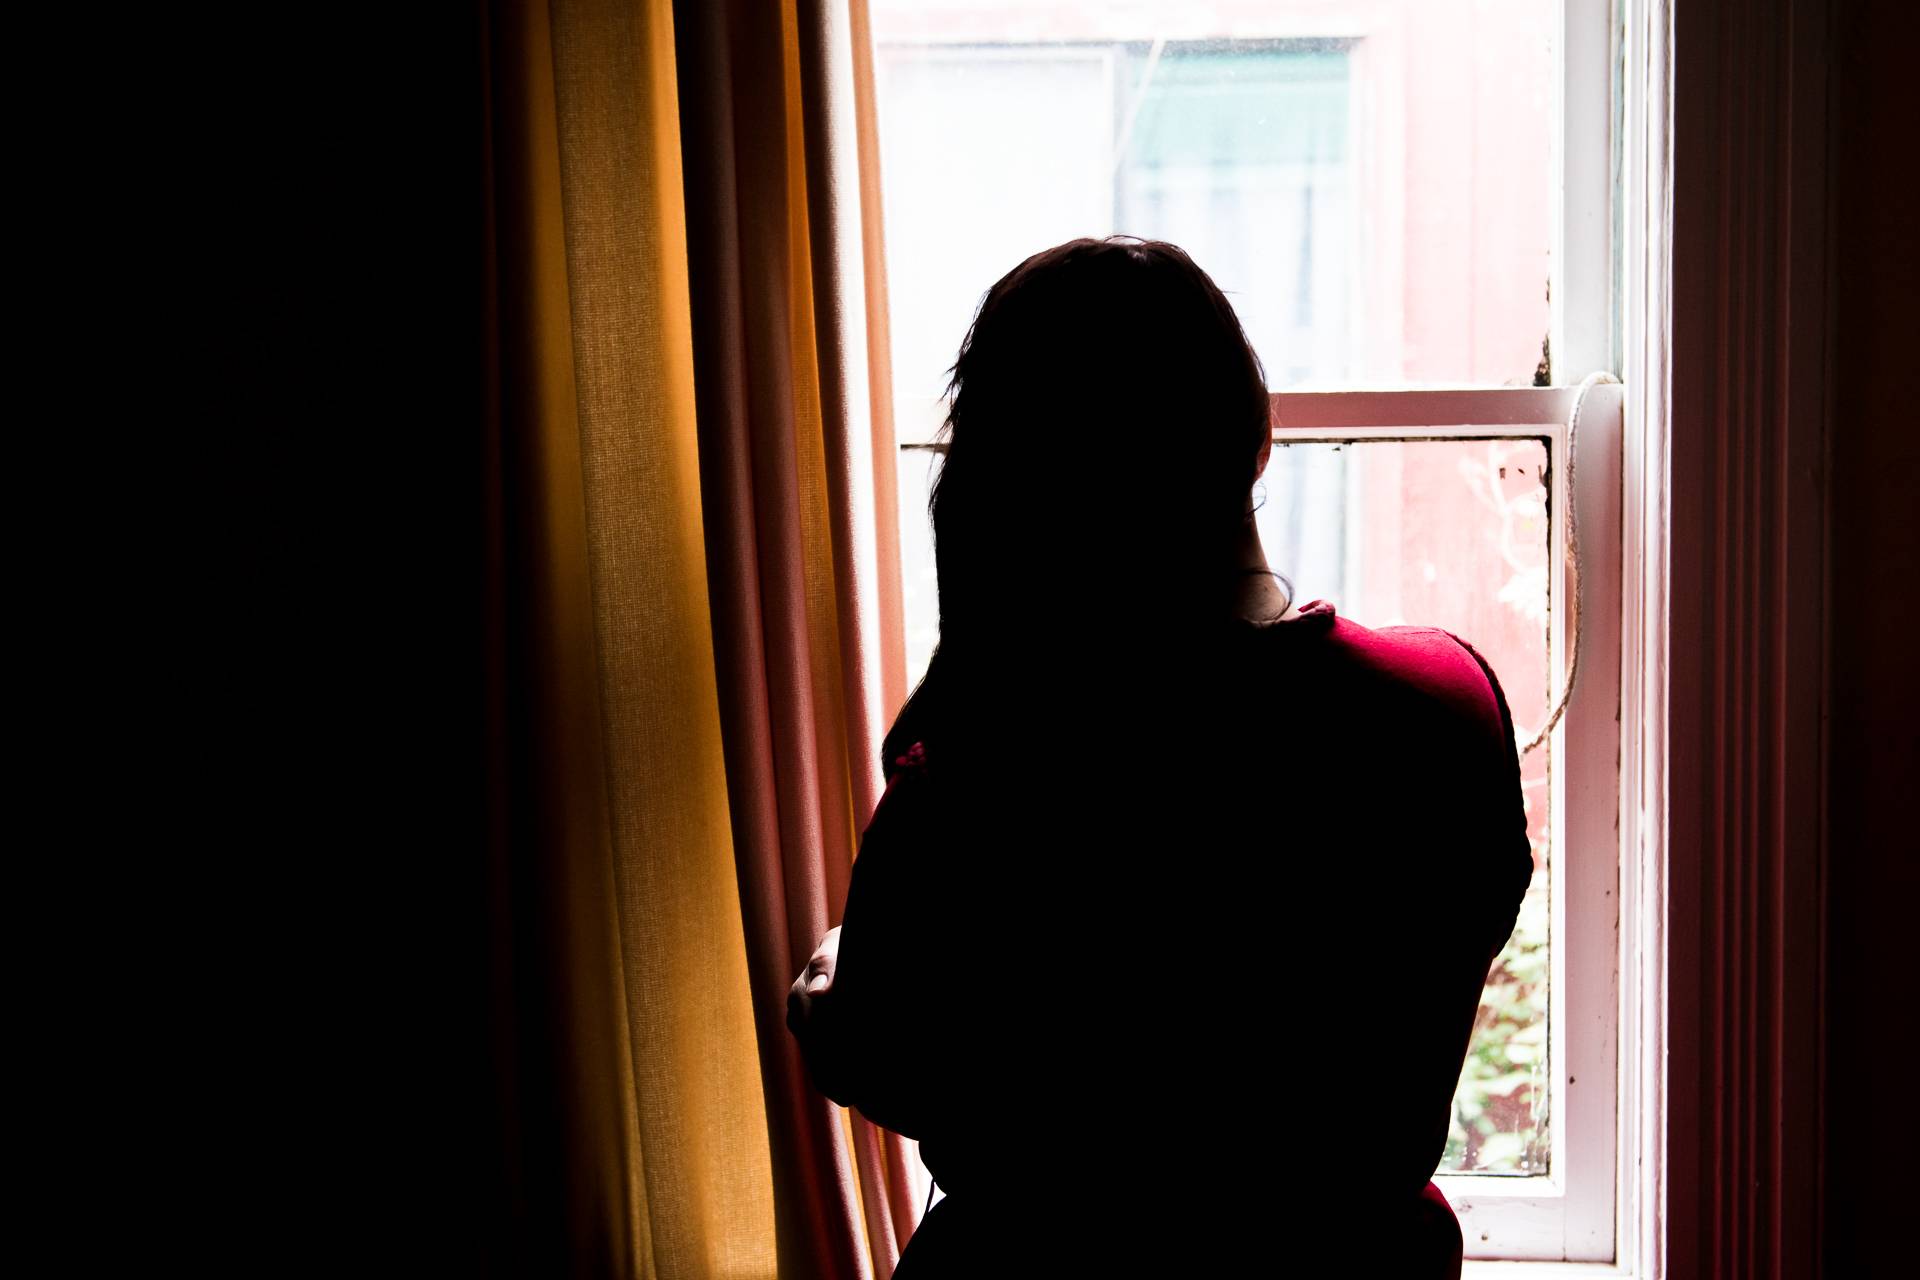 For many survivors of domestic violence in California, sheltering in place can feel strangely familiar. Many survivors are targets of their abusers’ undivided attention — often controlling their every movement and isolating them from the outside world. Beth LaBerge/KQED